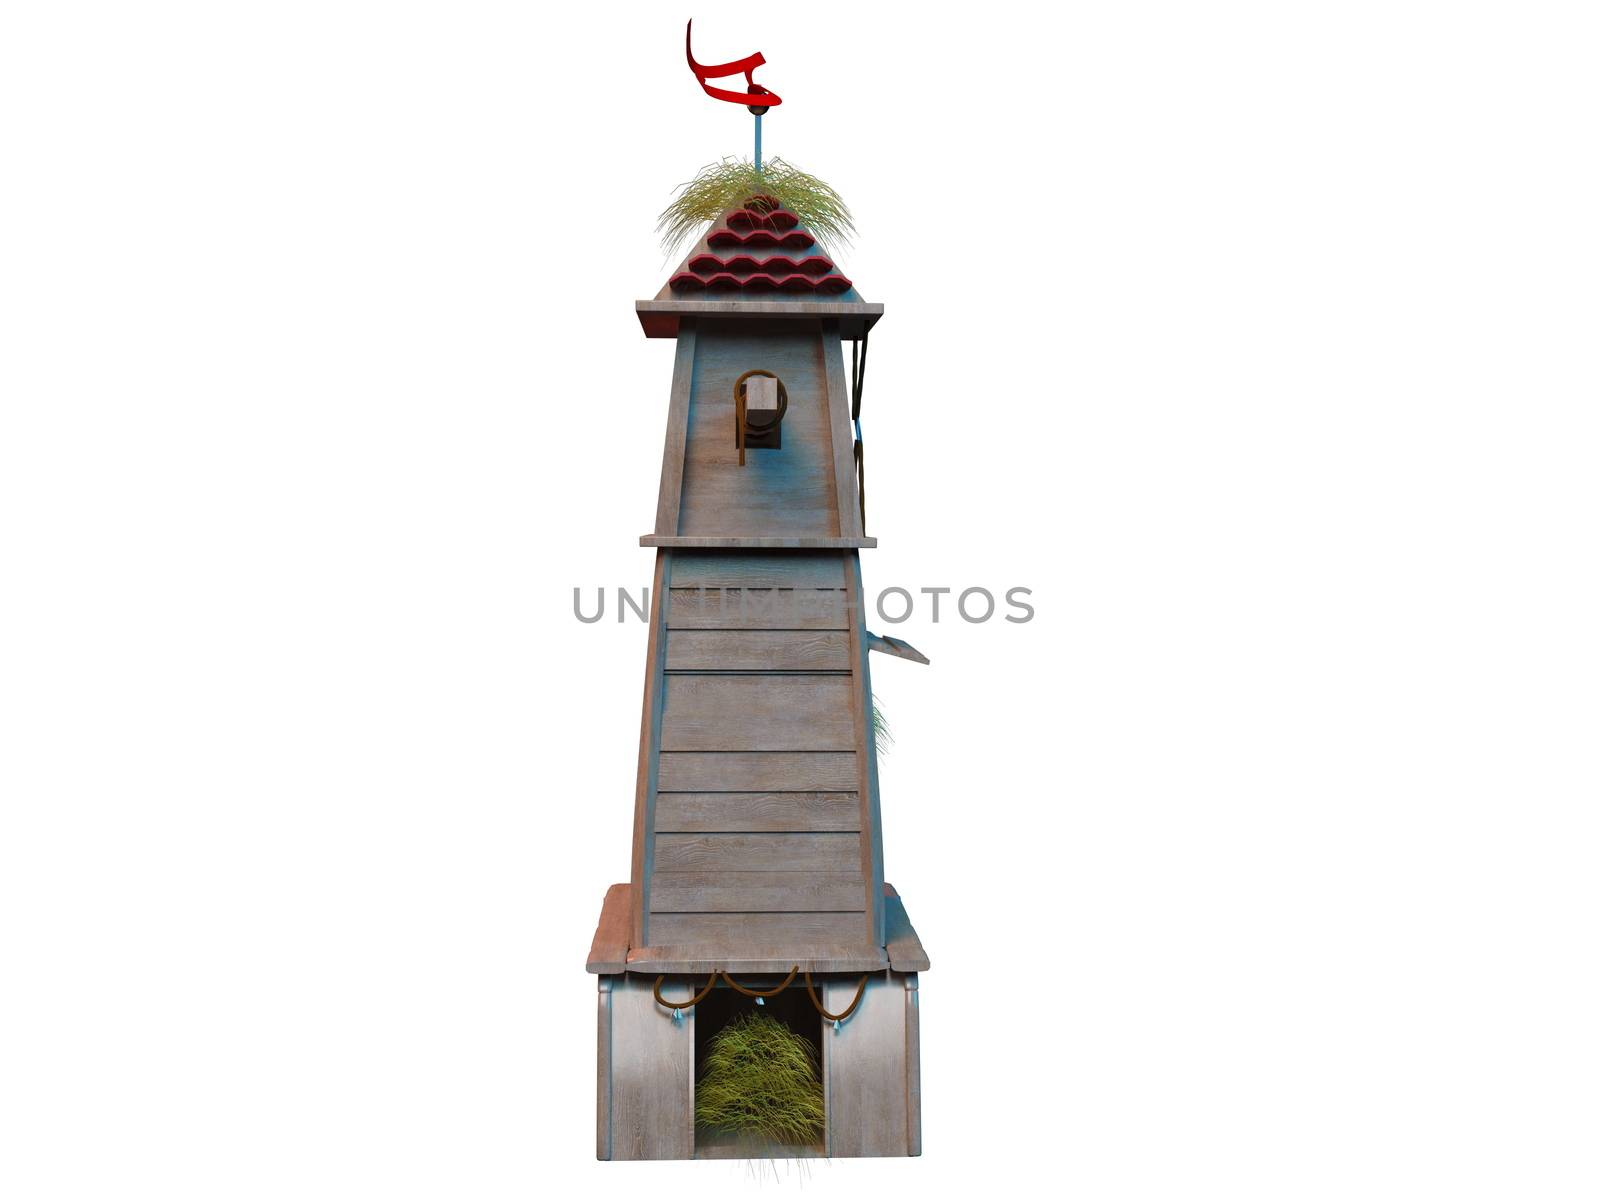 3d rendering of fantasy tower building with hay and woods and a red flag